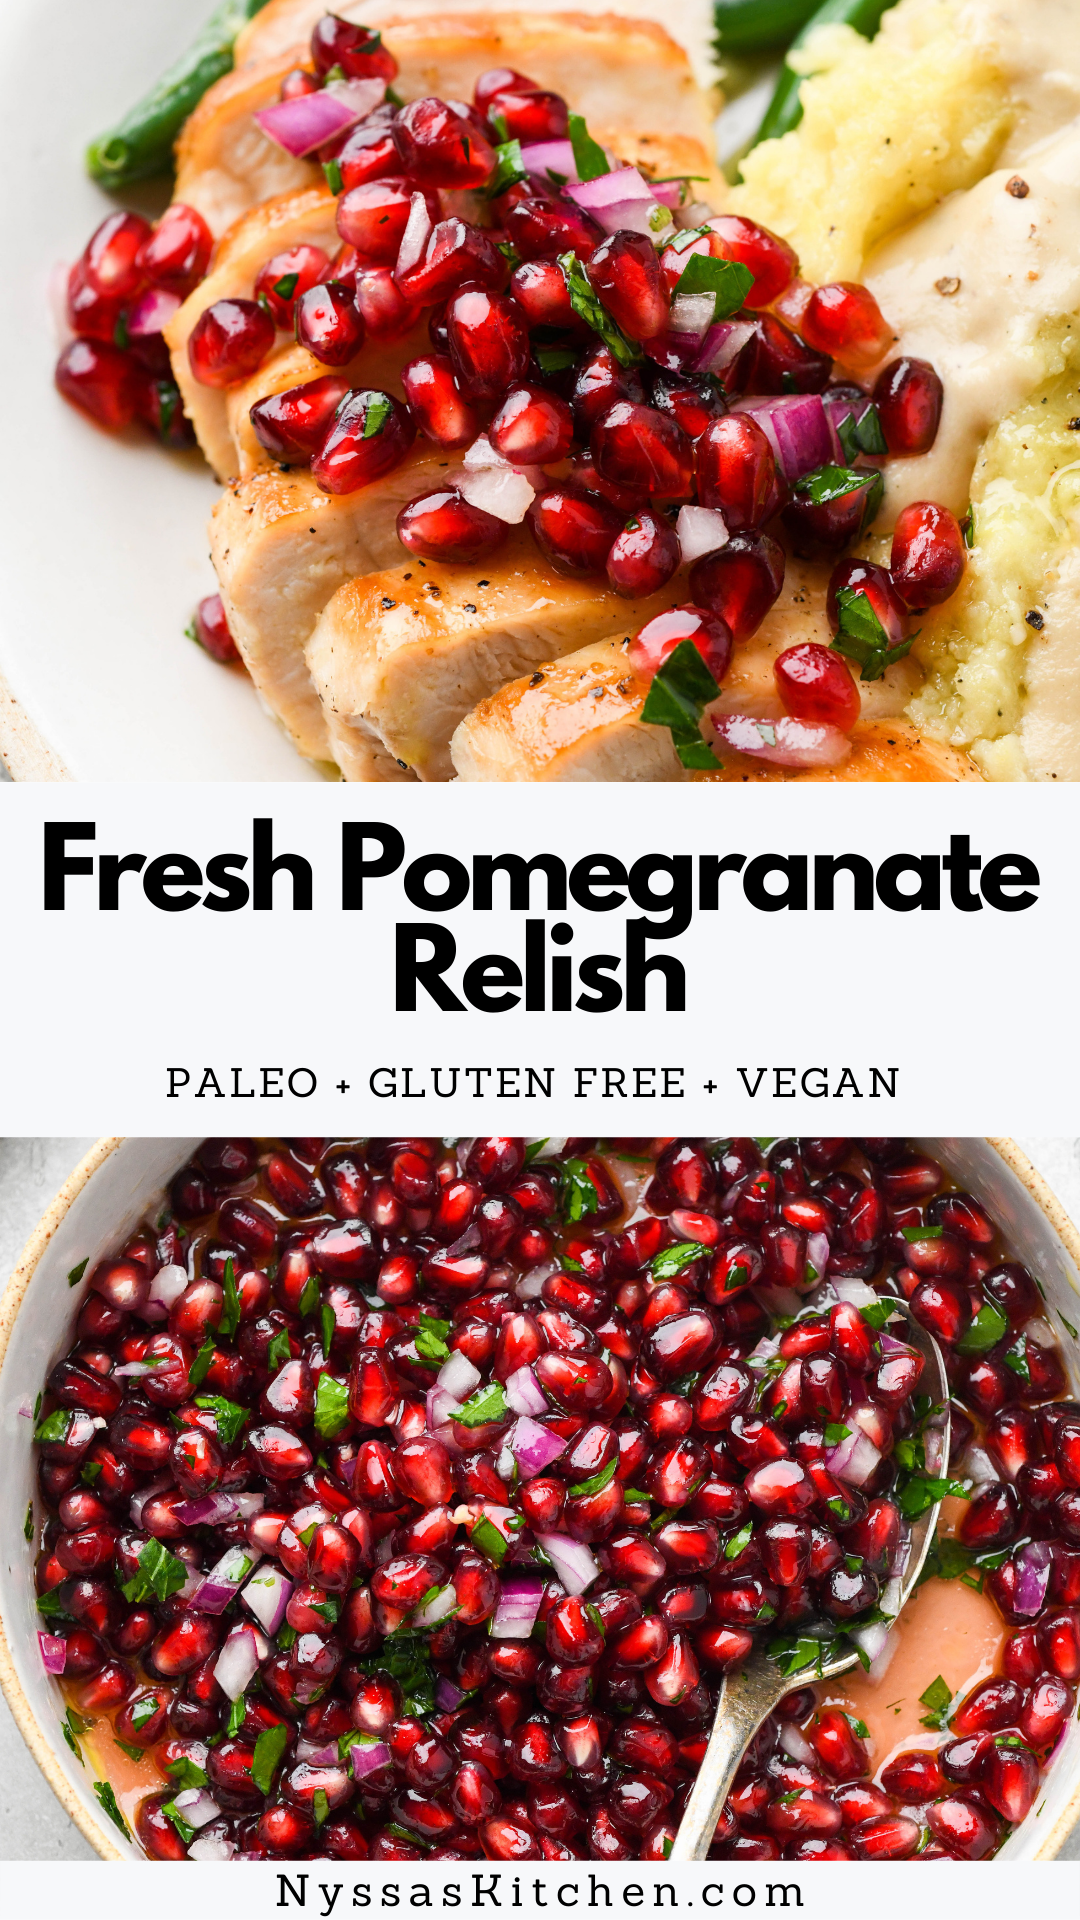 Fresh pomegranate relish is a bright and flavorful condiment that can be served with chicken, turkey, fish, or salad. A delightfully tart and juicy twist on classic cranberry relish that would be perfect for Thanksgiving dinner! Vegan, gluten free, paleo.